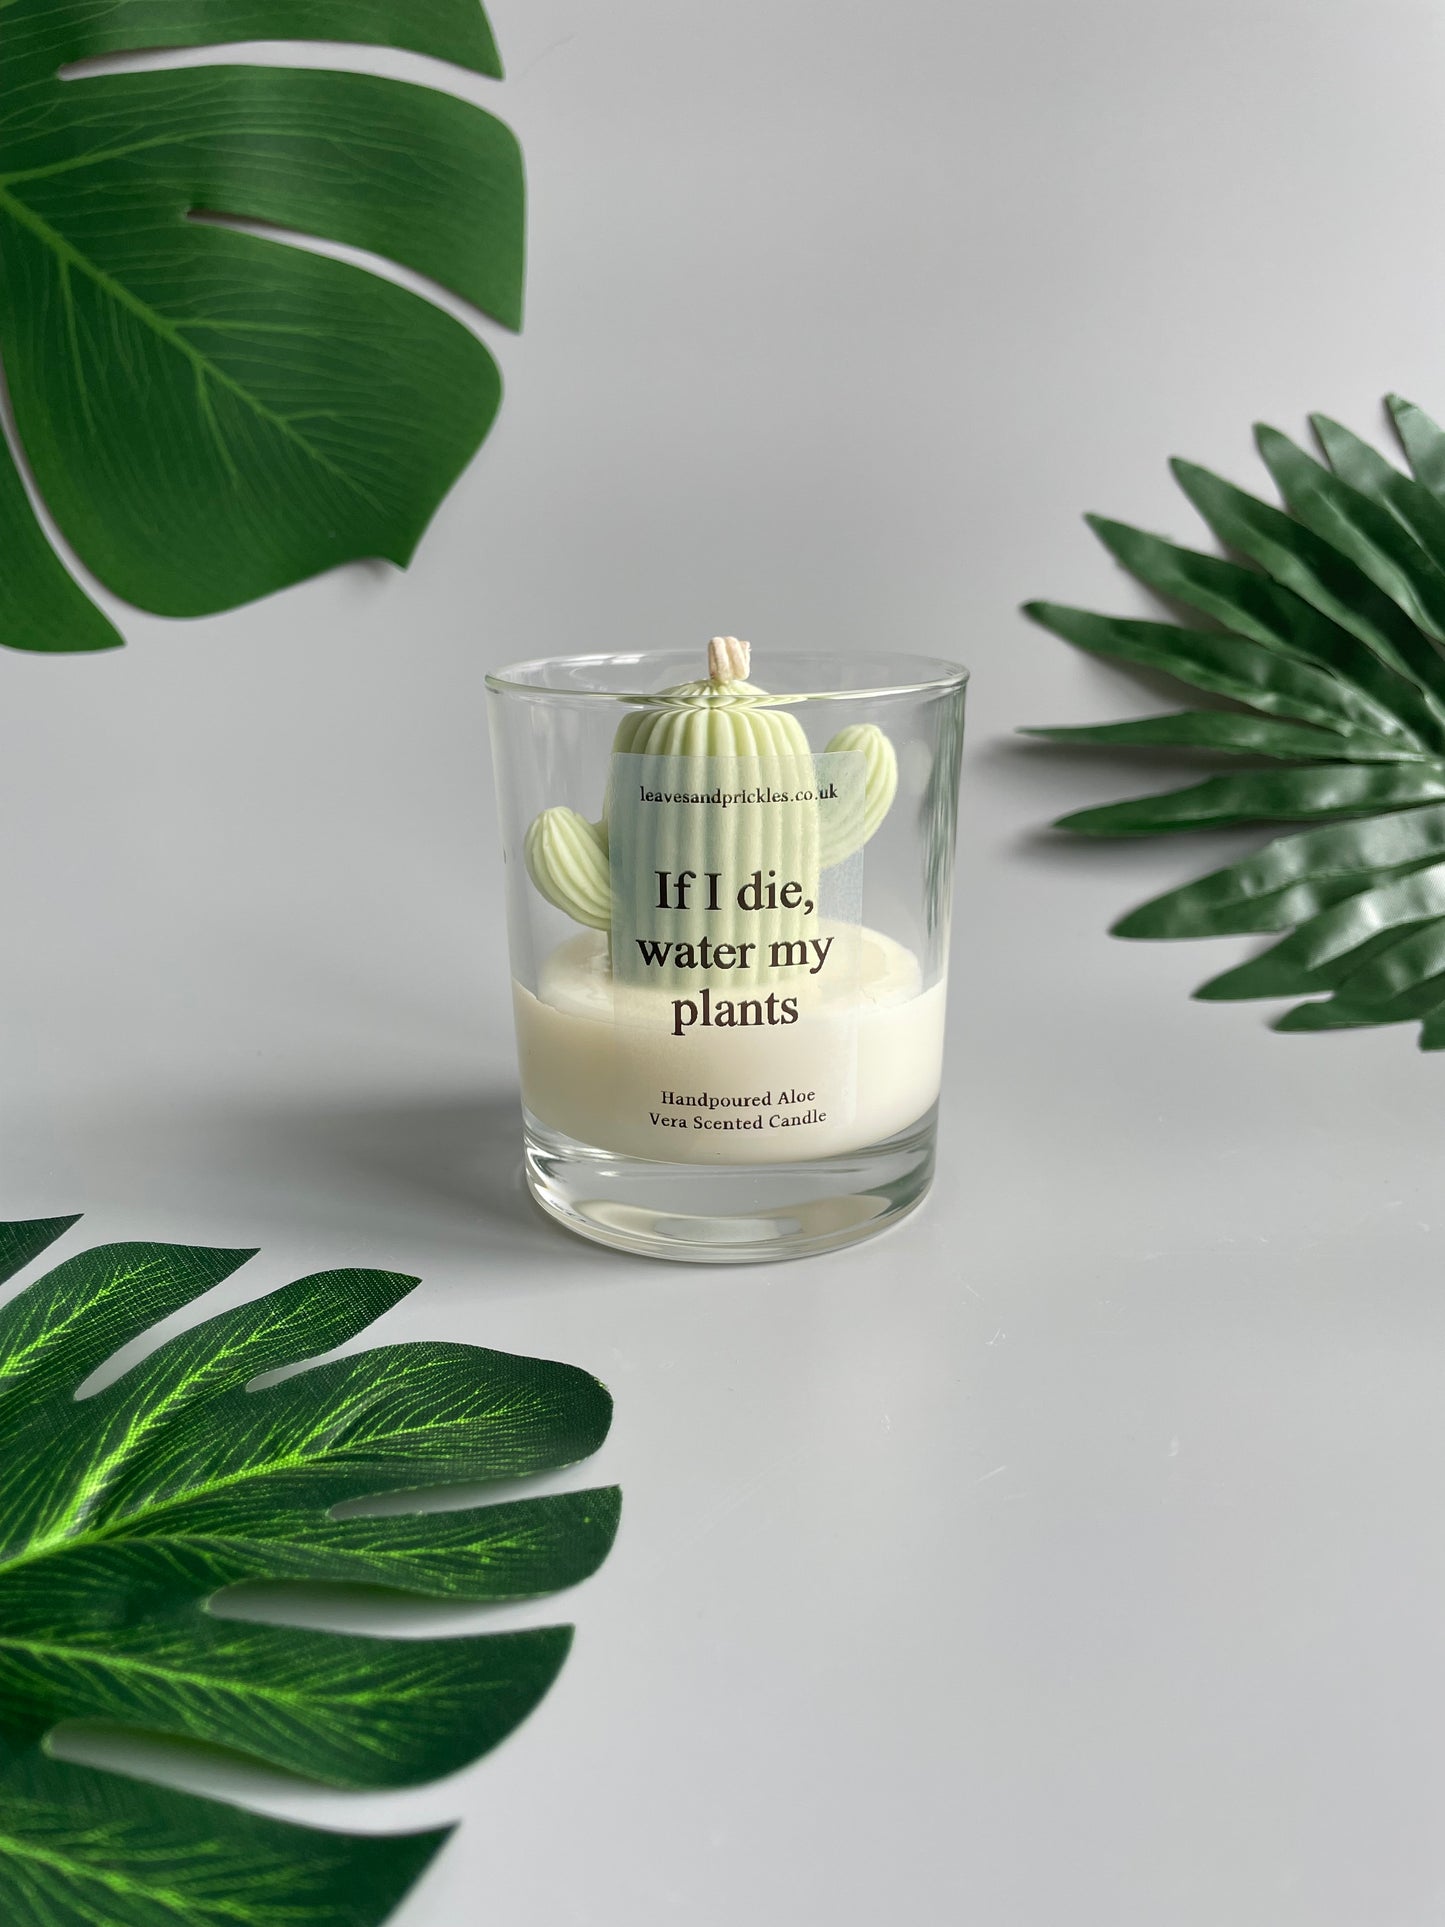 If I die, water my plants Cactus Candle in Clear Glass Jar